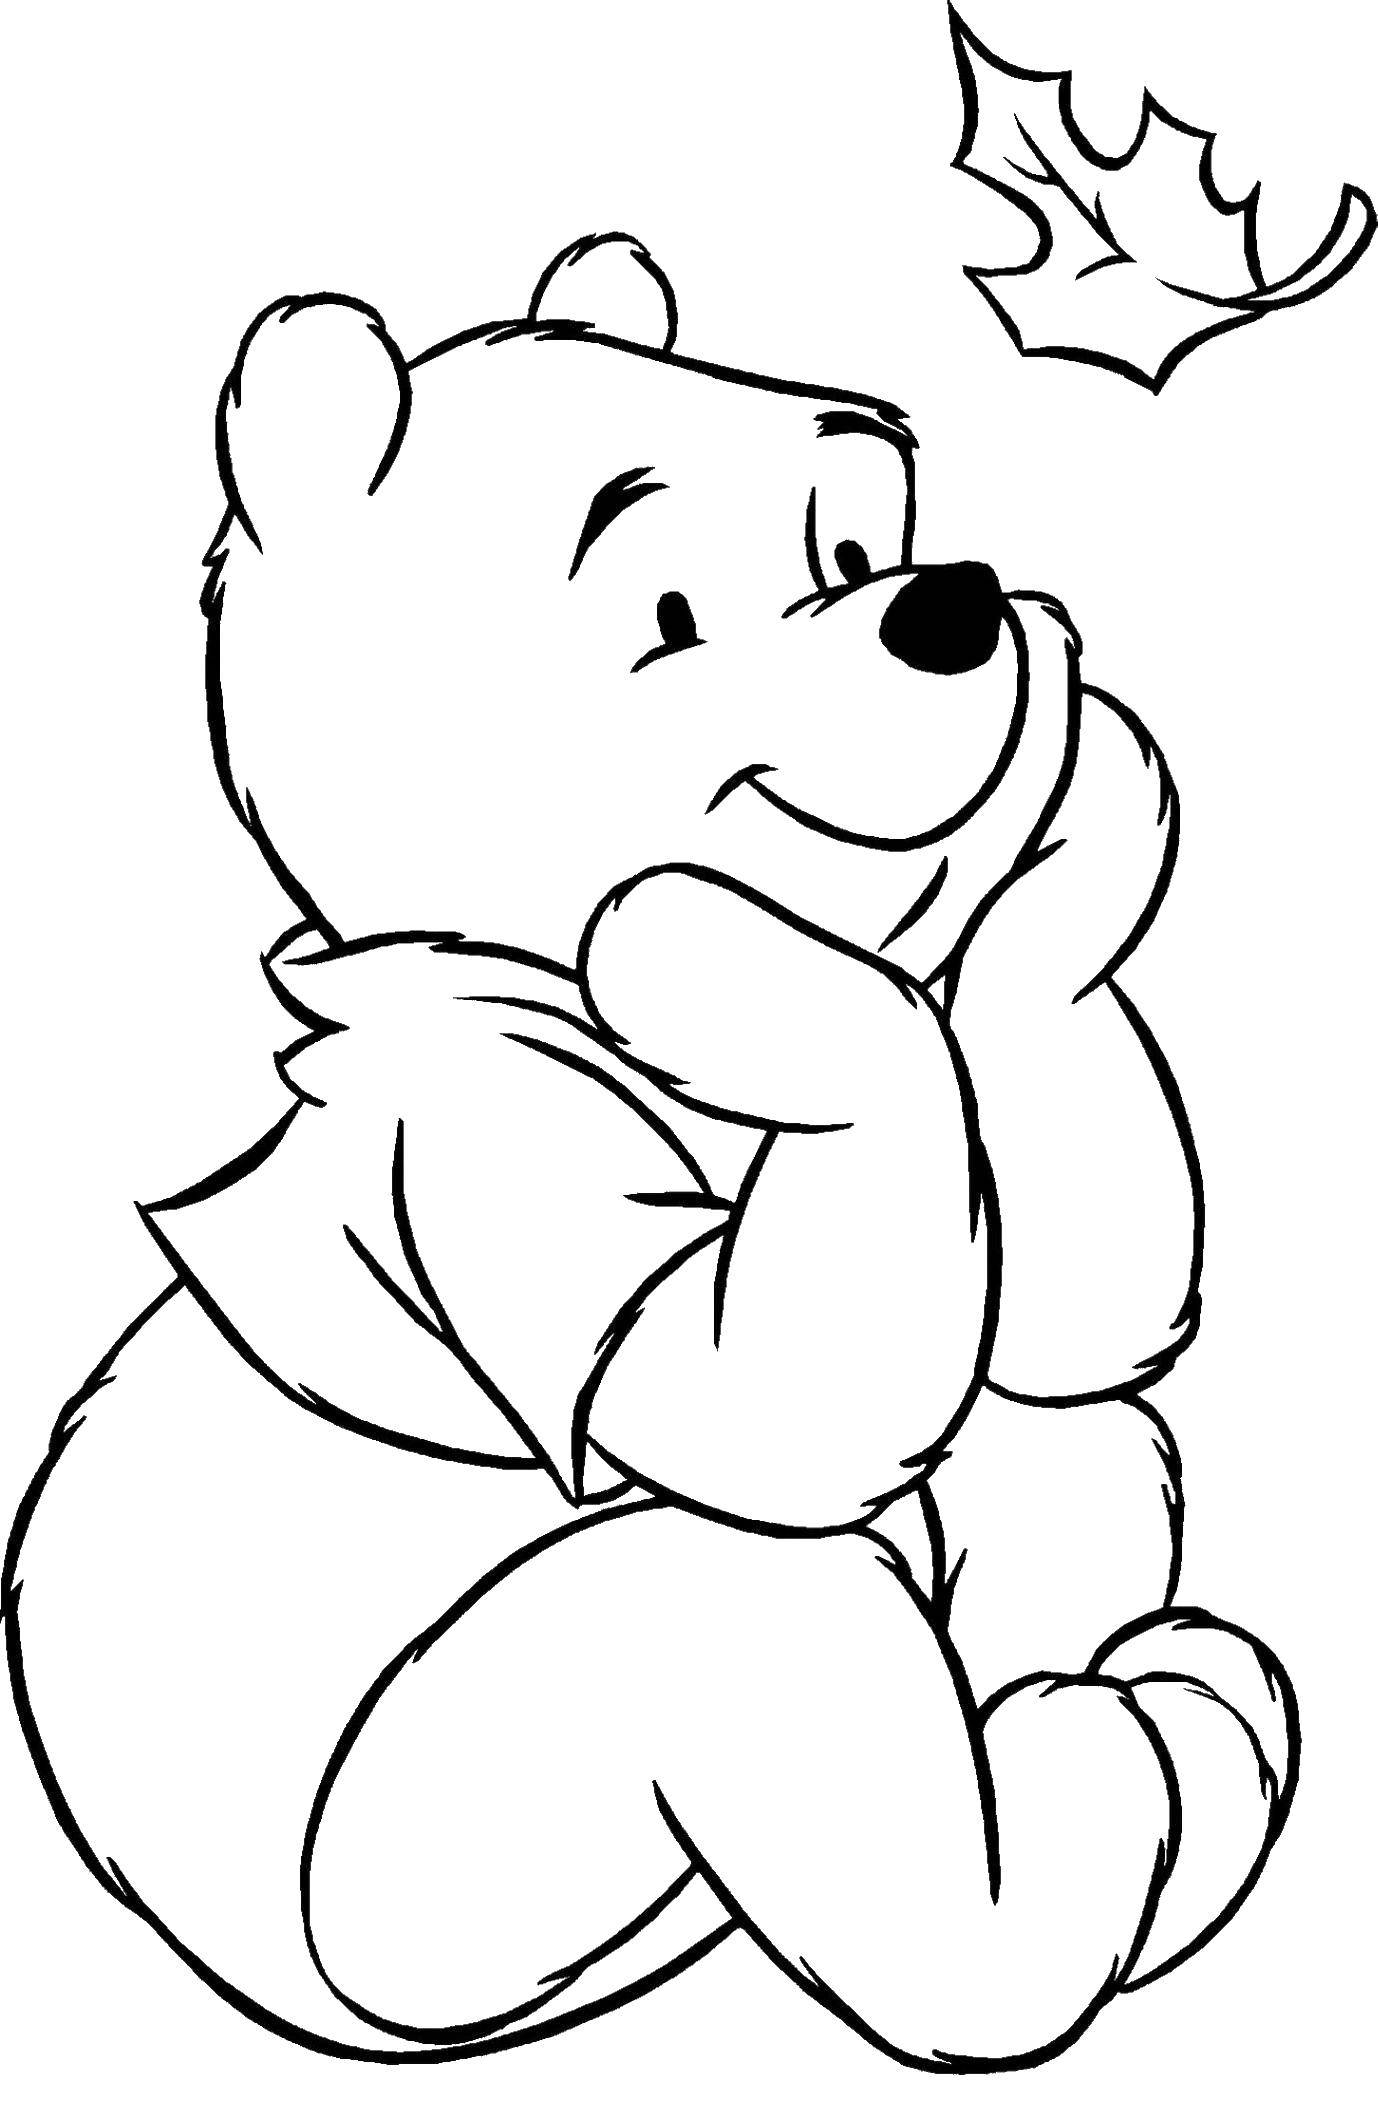 Coloring Winnie the Pooh and a piece. Category Disney coloring pages. Tags:  Winnie, leaf, bear.